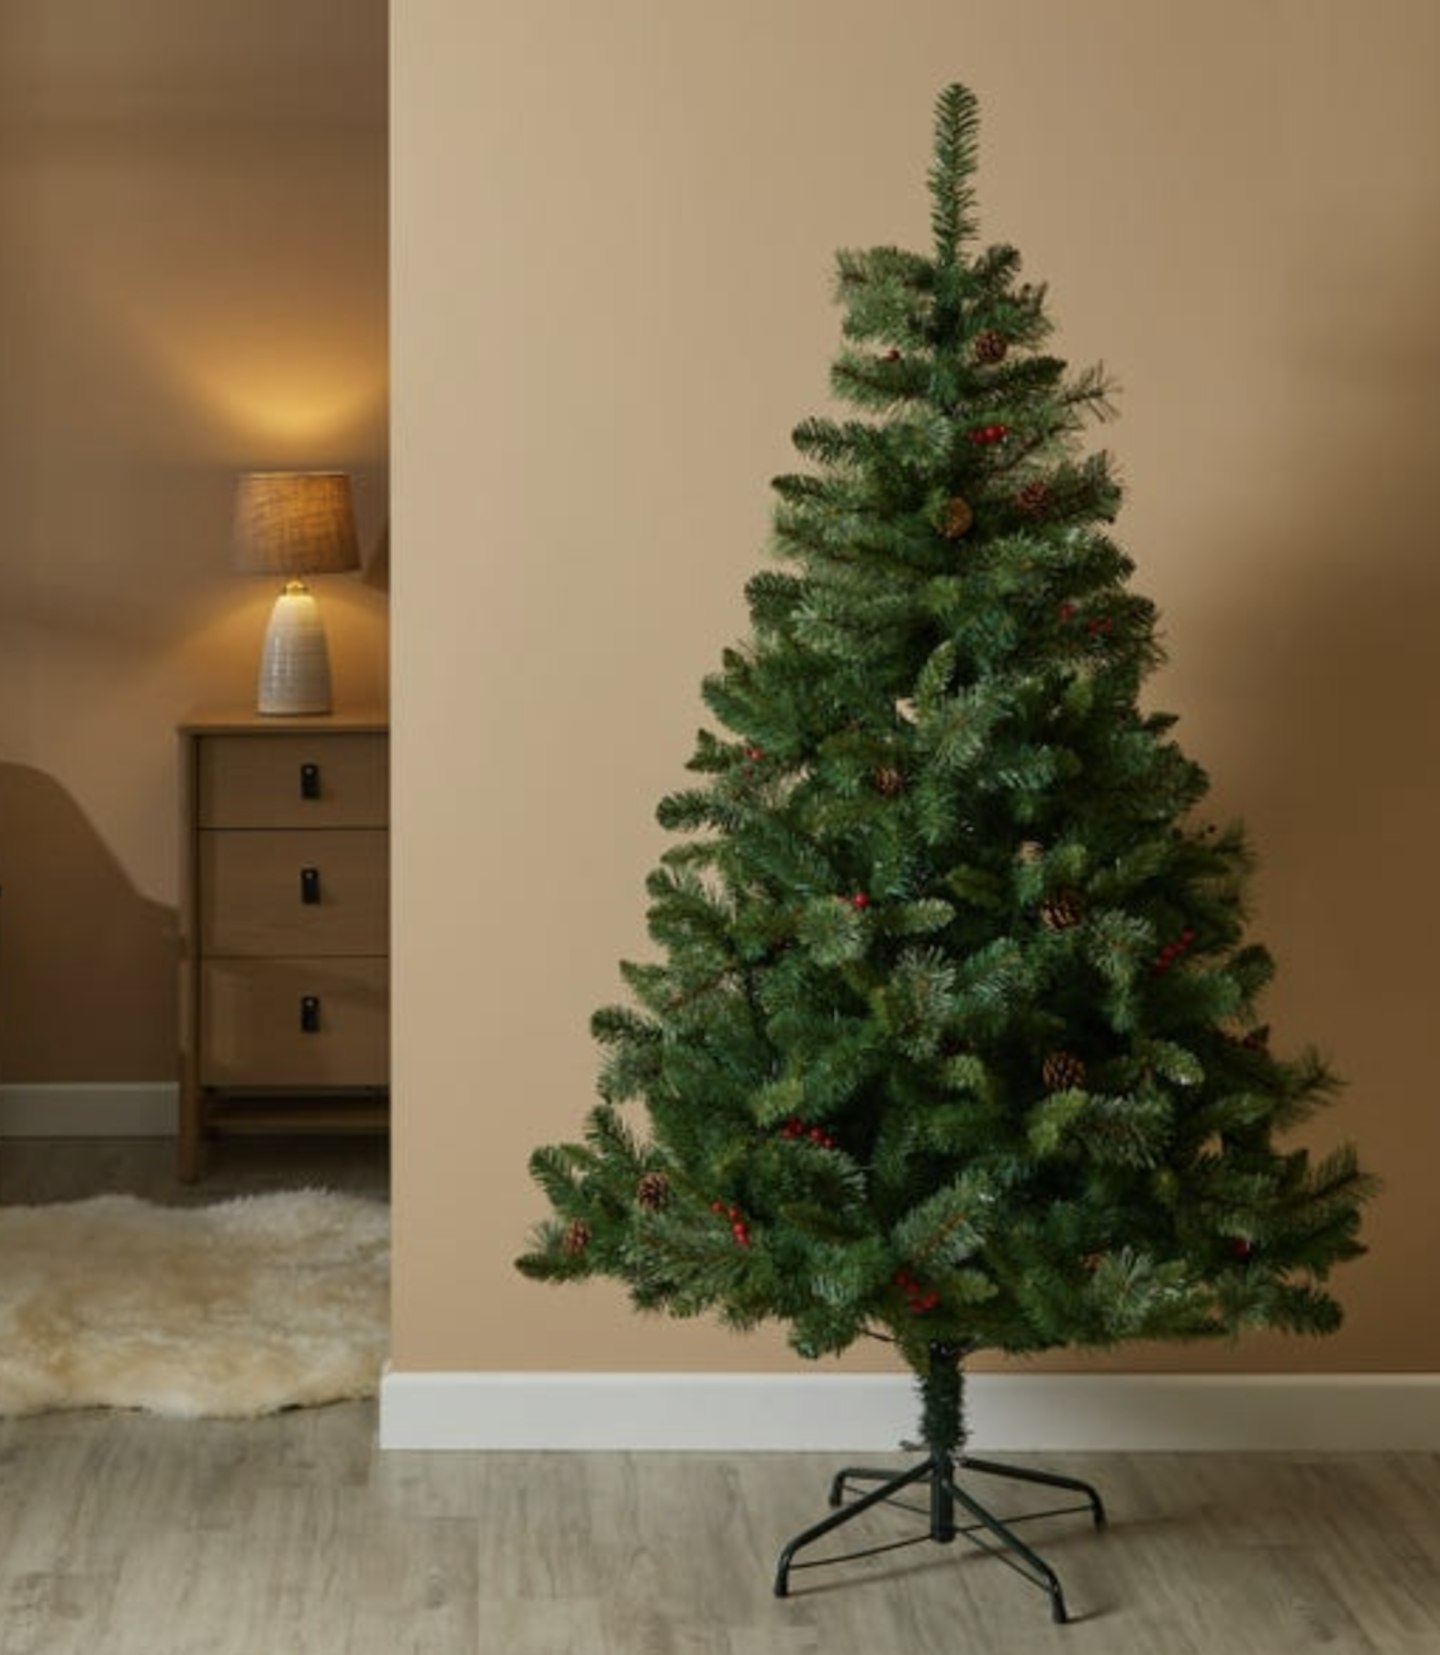 Dunelm Berry and Cone Christmas Tree 6ft